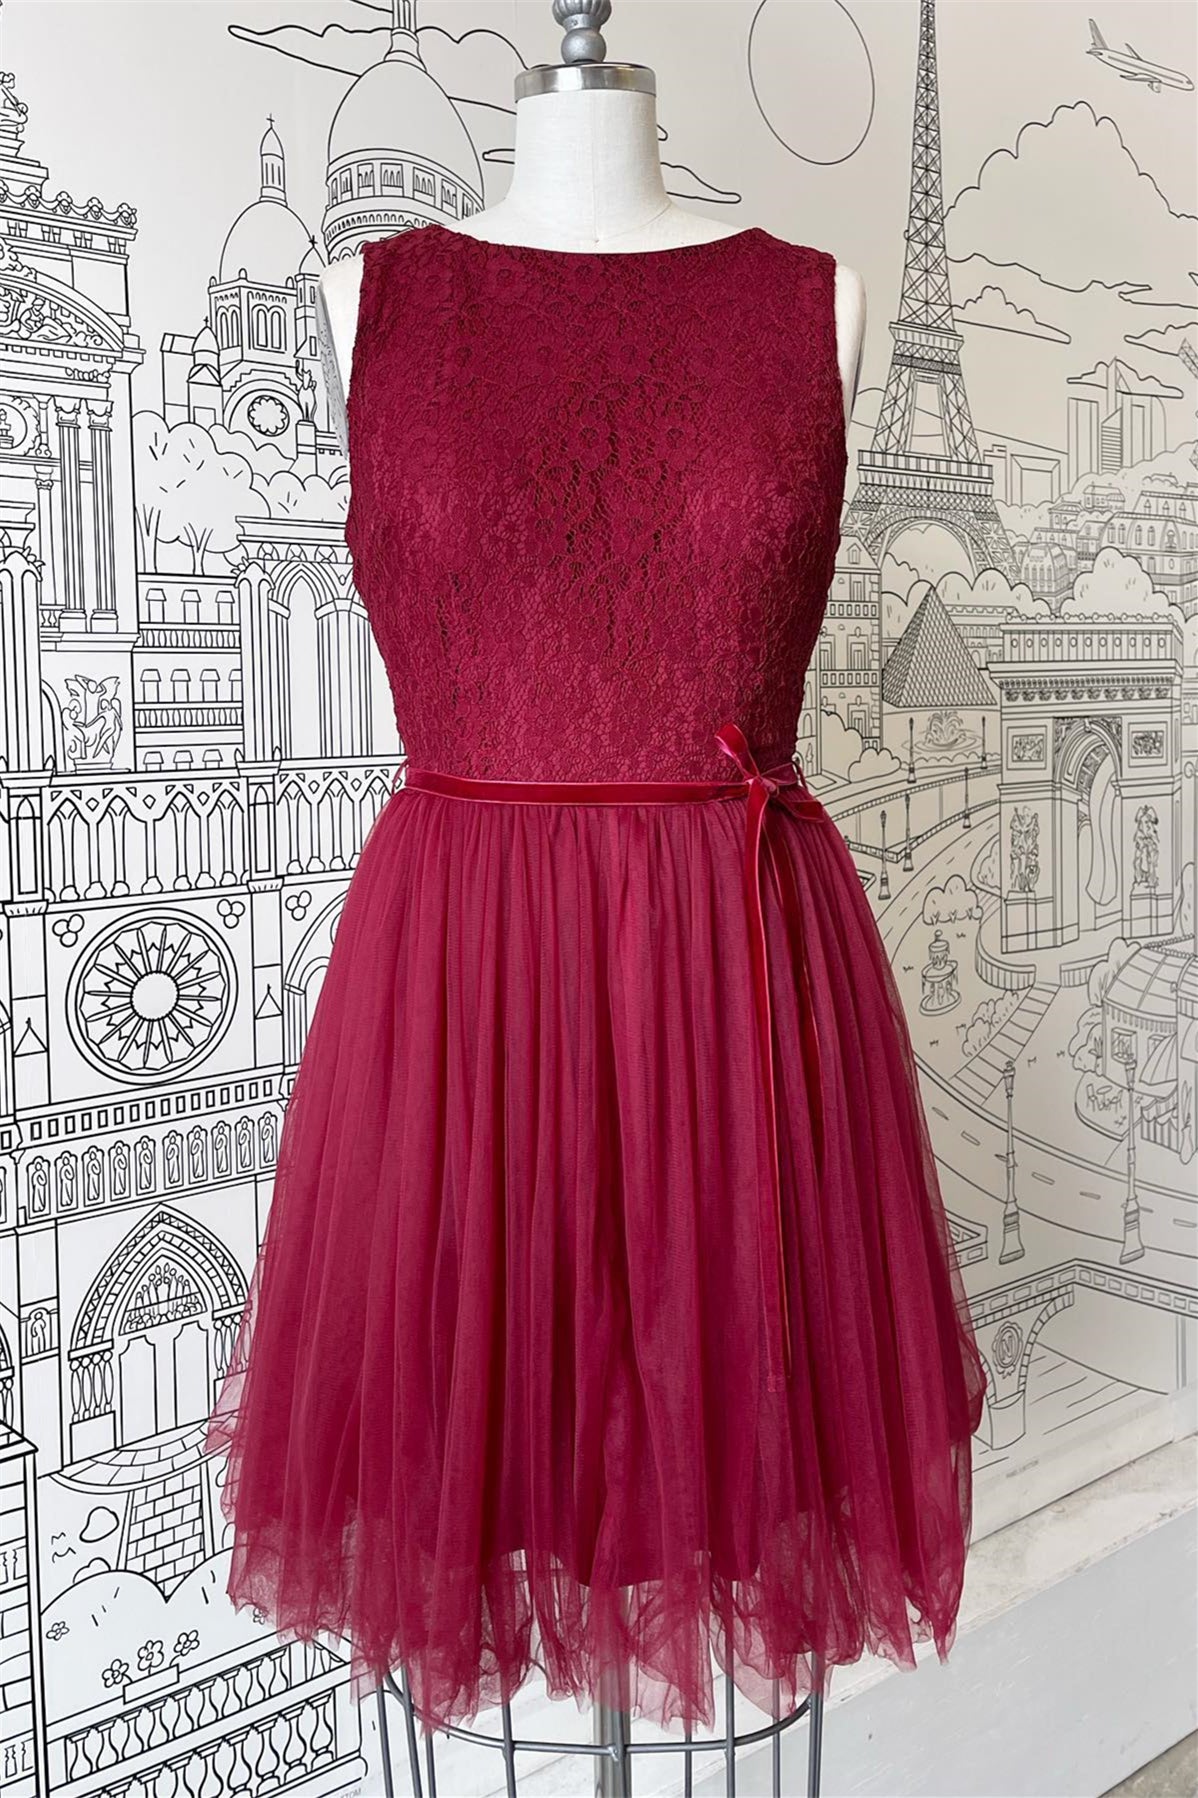 Malberry A-line Scoop Neck Tulle Lace Mini Bridesmaid Dress with Sash